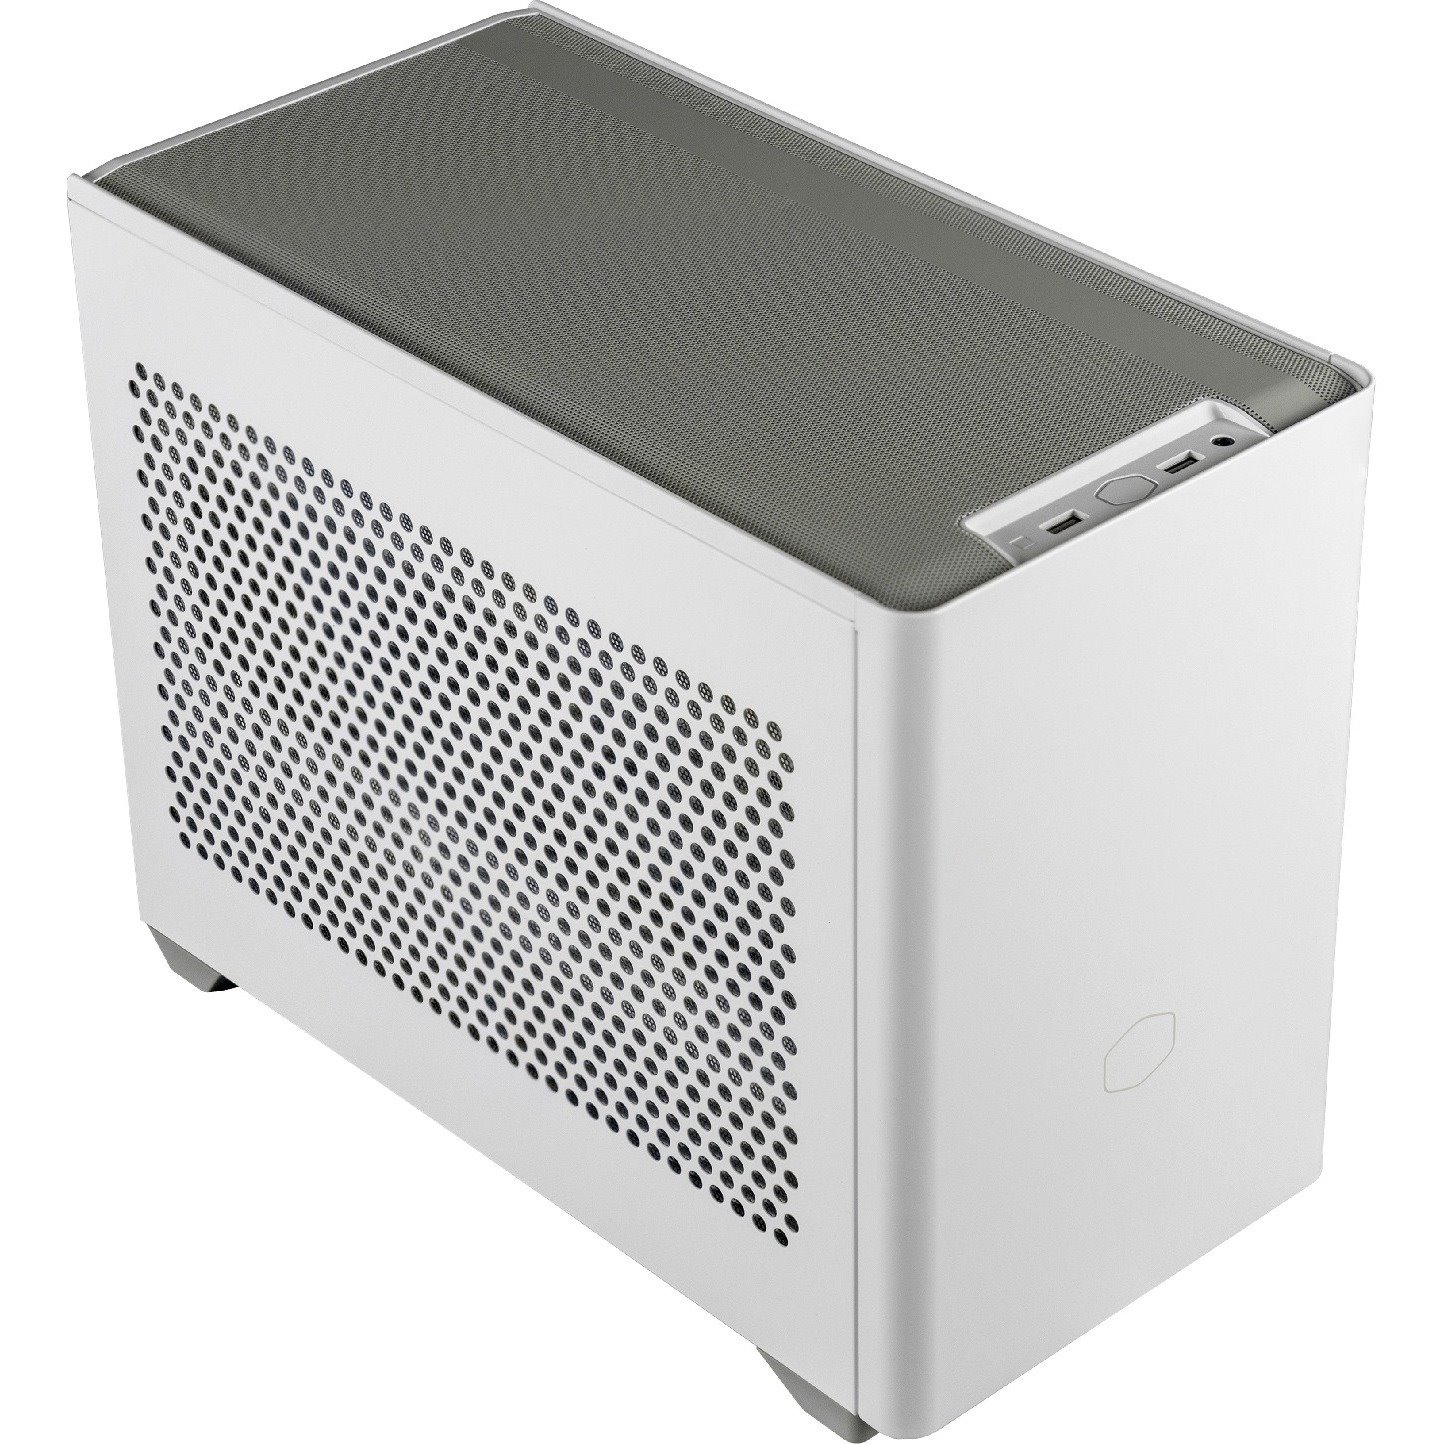 Cooler Master MasterBox MCB-NR200P-WGNN-S00 Computer Case - Mini DTX, Mini ITX Motherboard Supported - Mini-tower - Mesh, ABS Plastic, Tempered Glass, Galvanized Steel - White, Grey